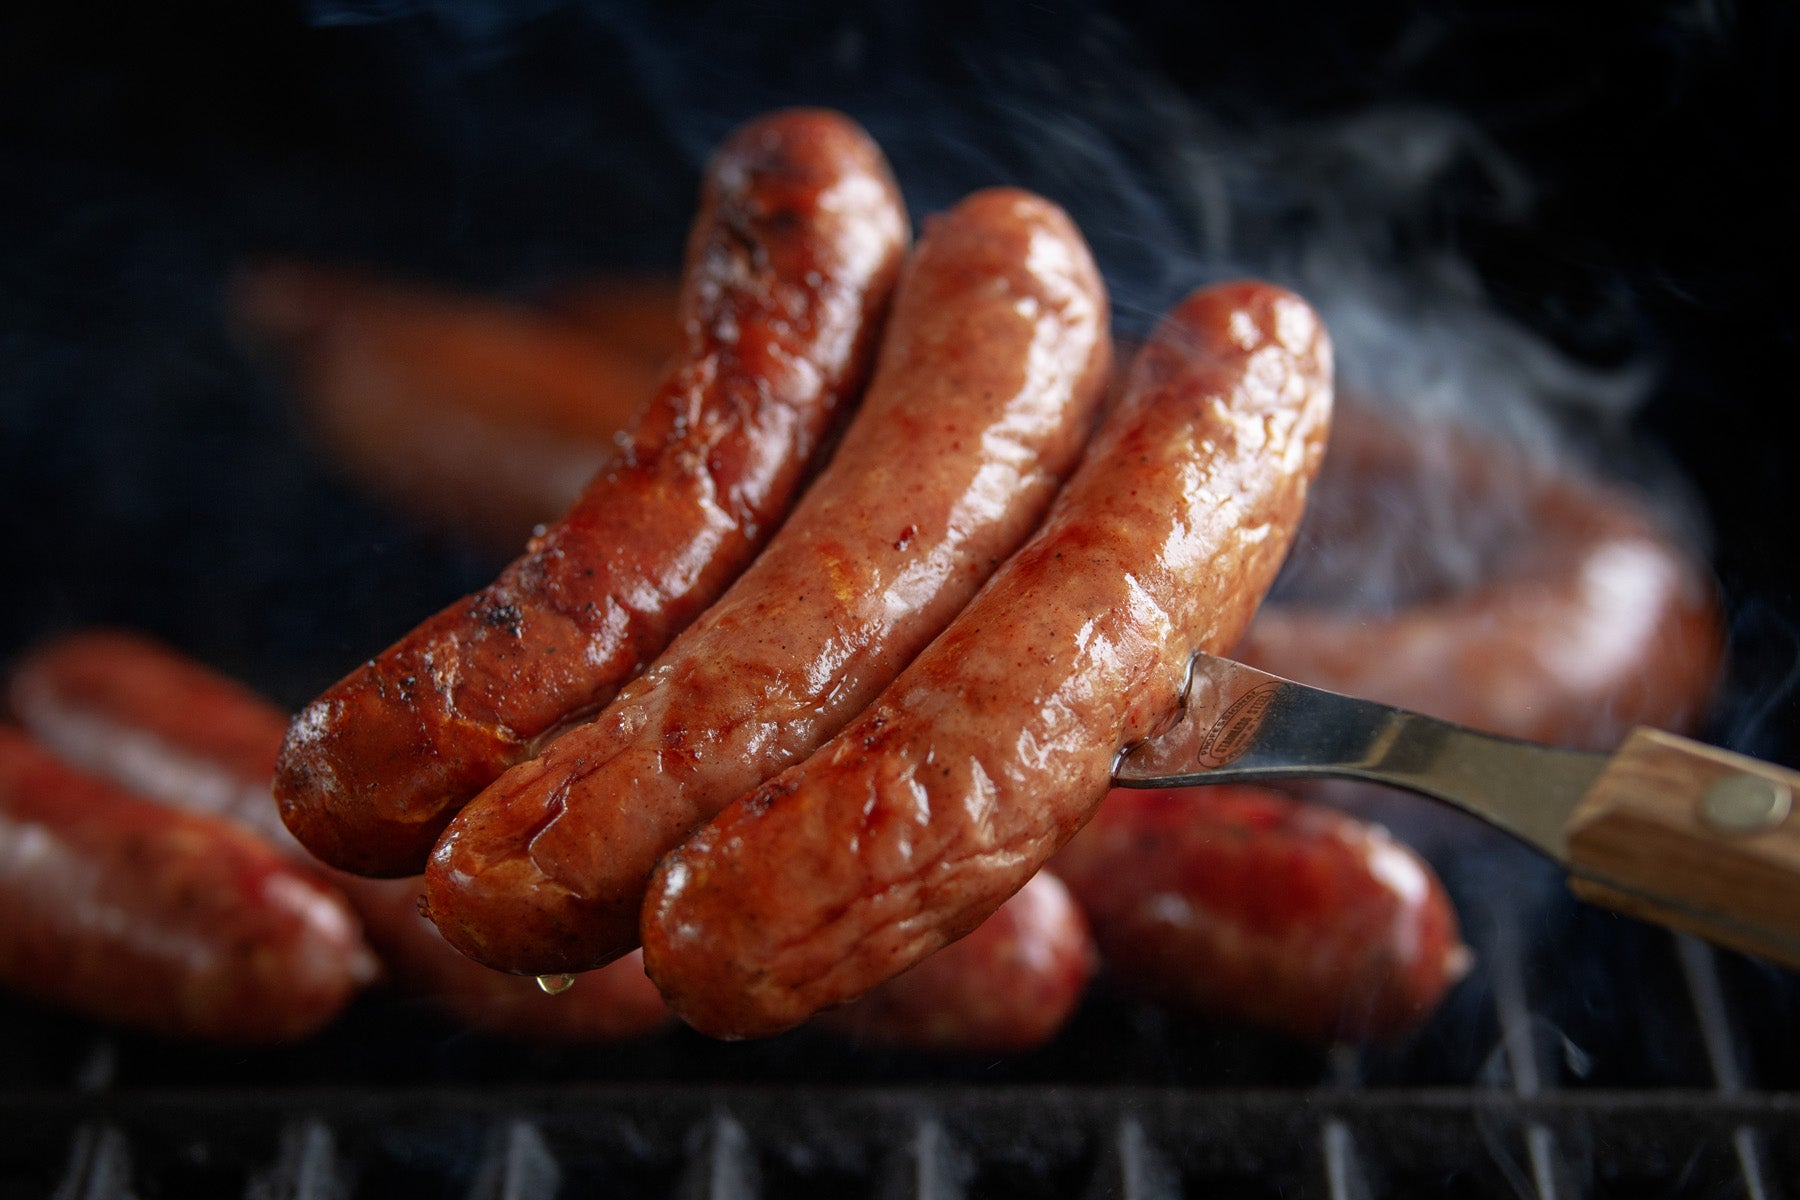 3 Uncured Sausage Links are shown on a large fork over the grates of a grill as smoke rises in the background.